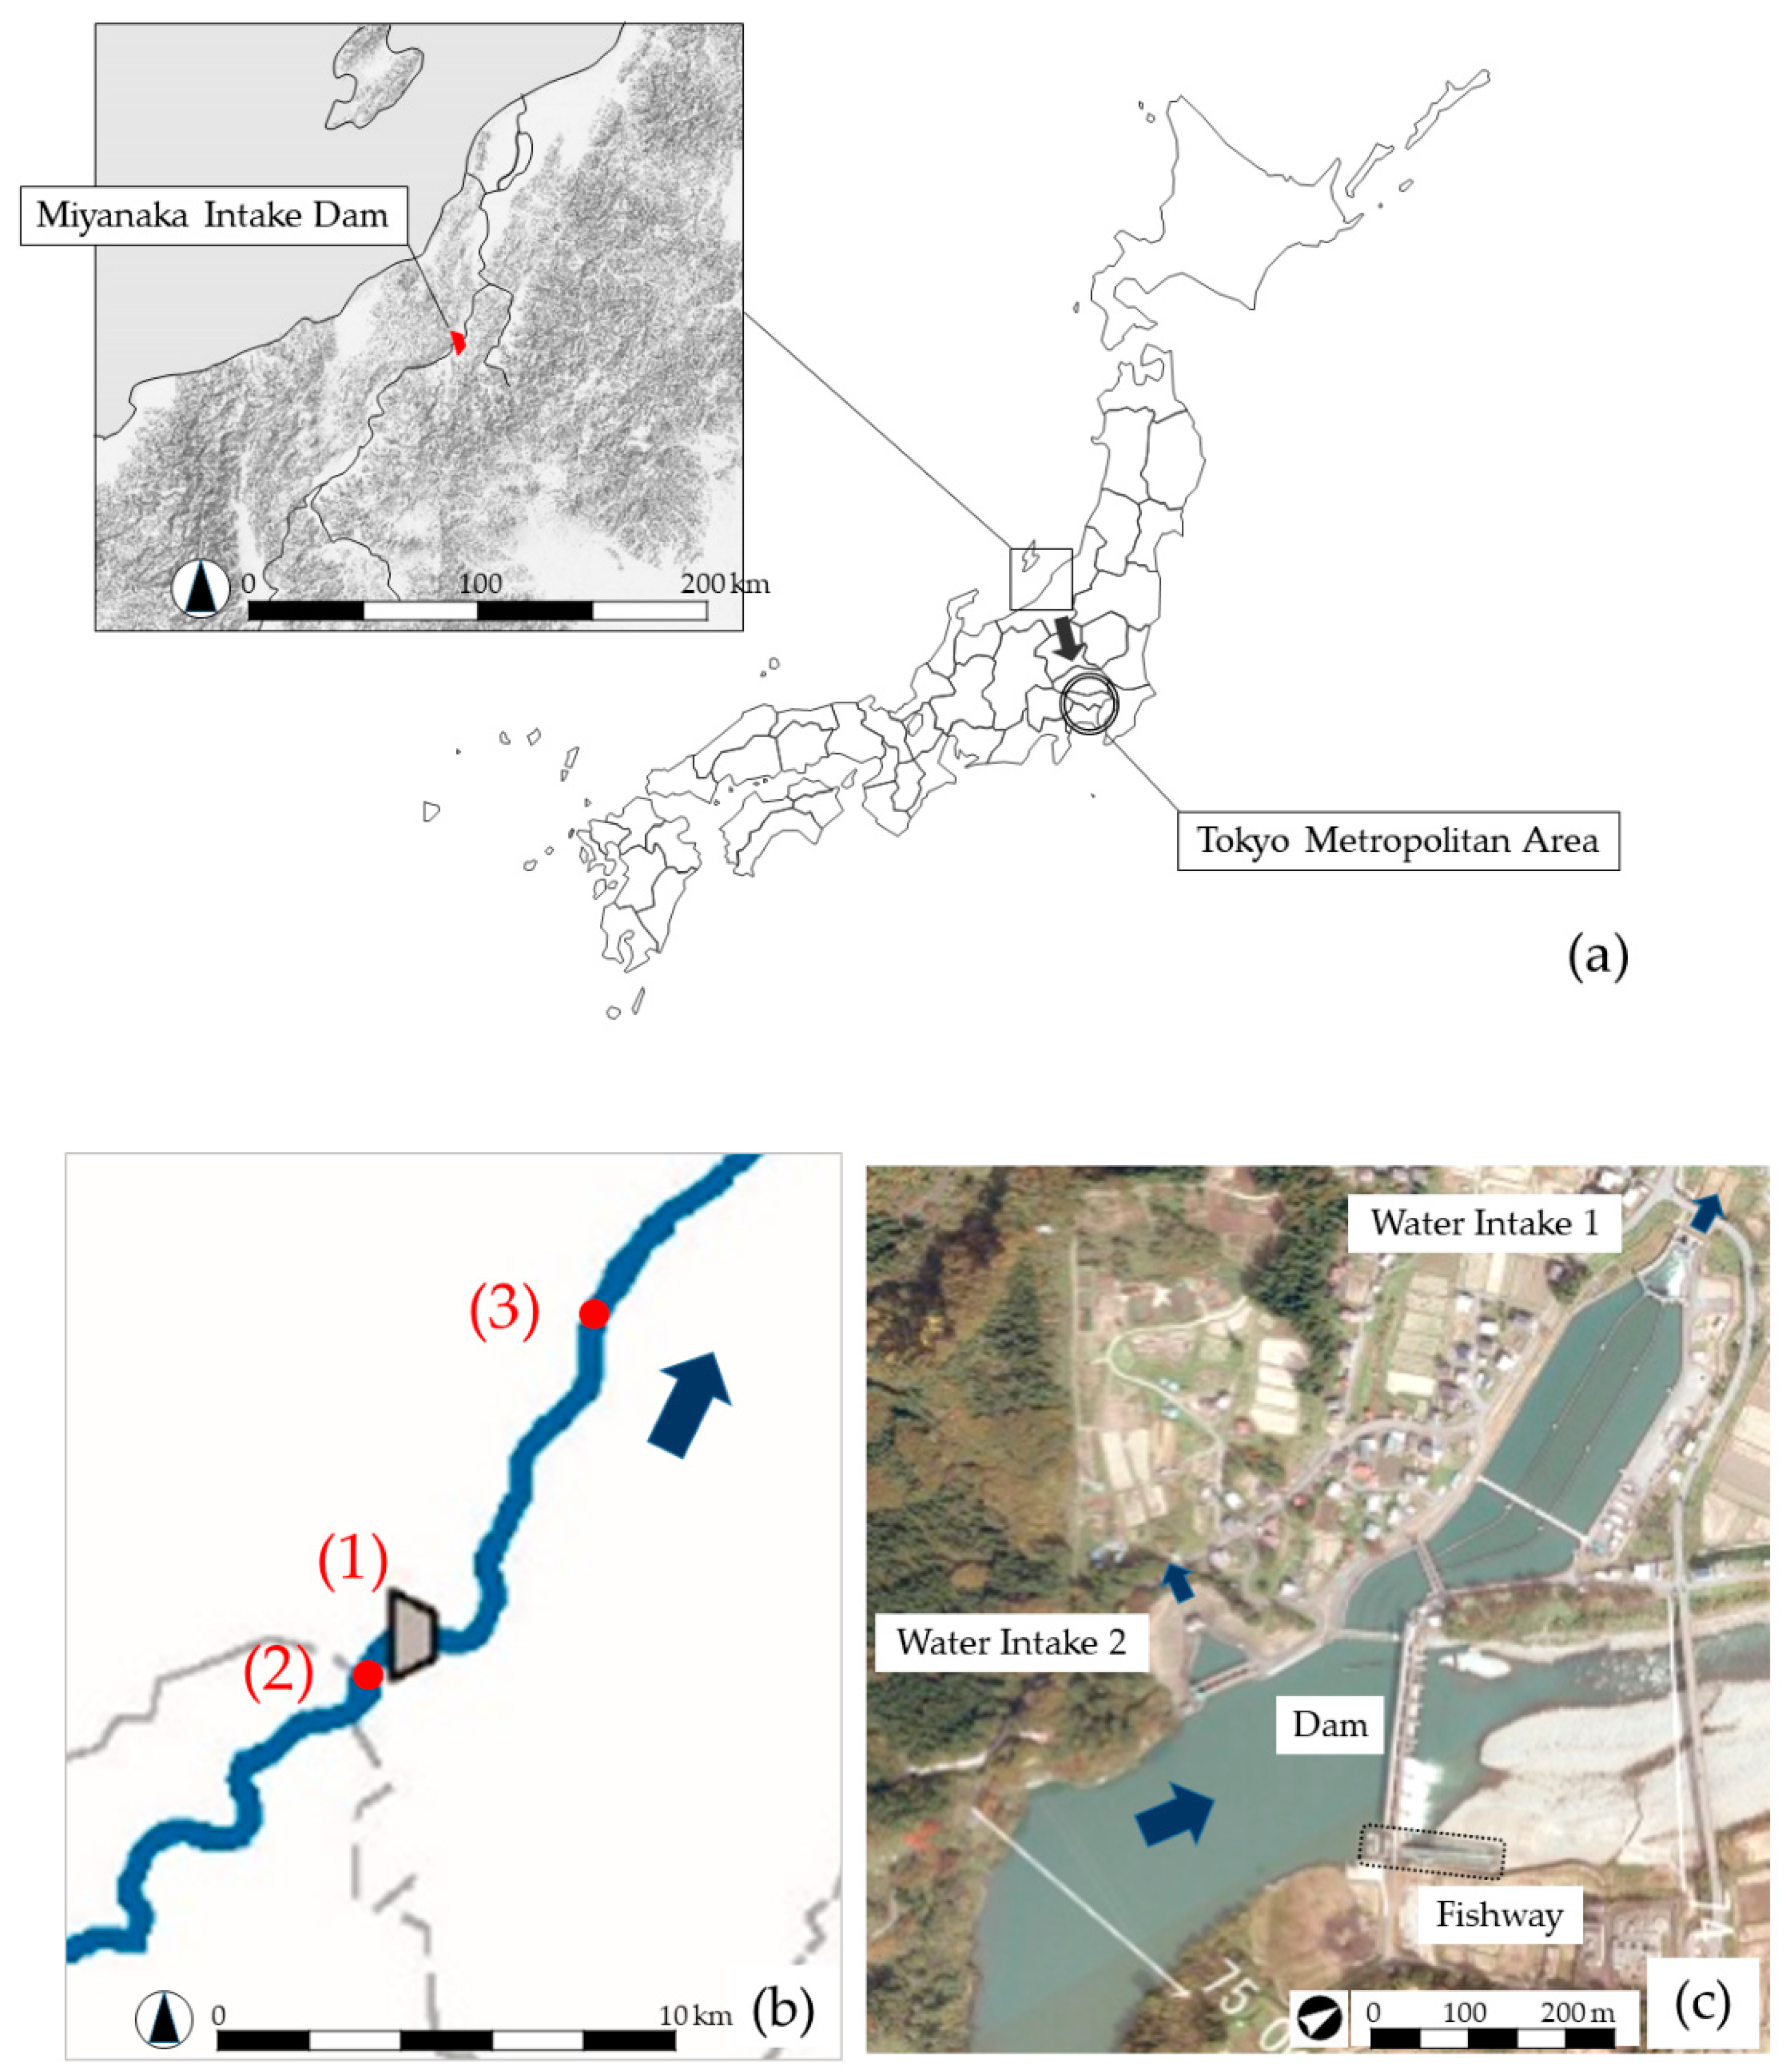 Water | Free Full-Text | Effectiveness of New Rock-Ramp Fishway at Miyanaka  Intake Dam Compared with Existing Large and Small Stair-Type Fishways | HTML